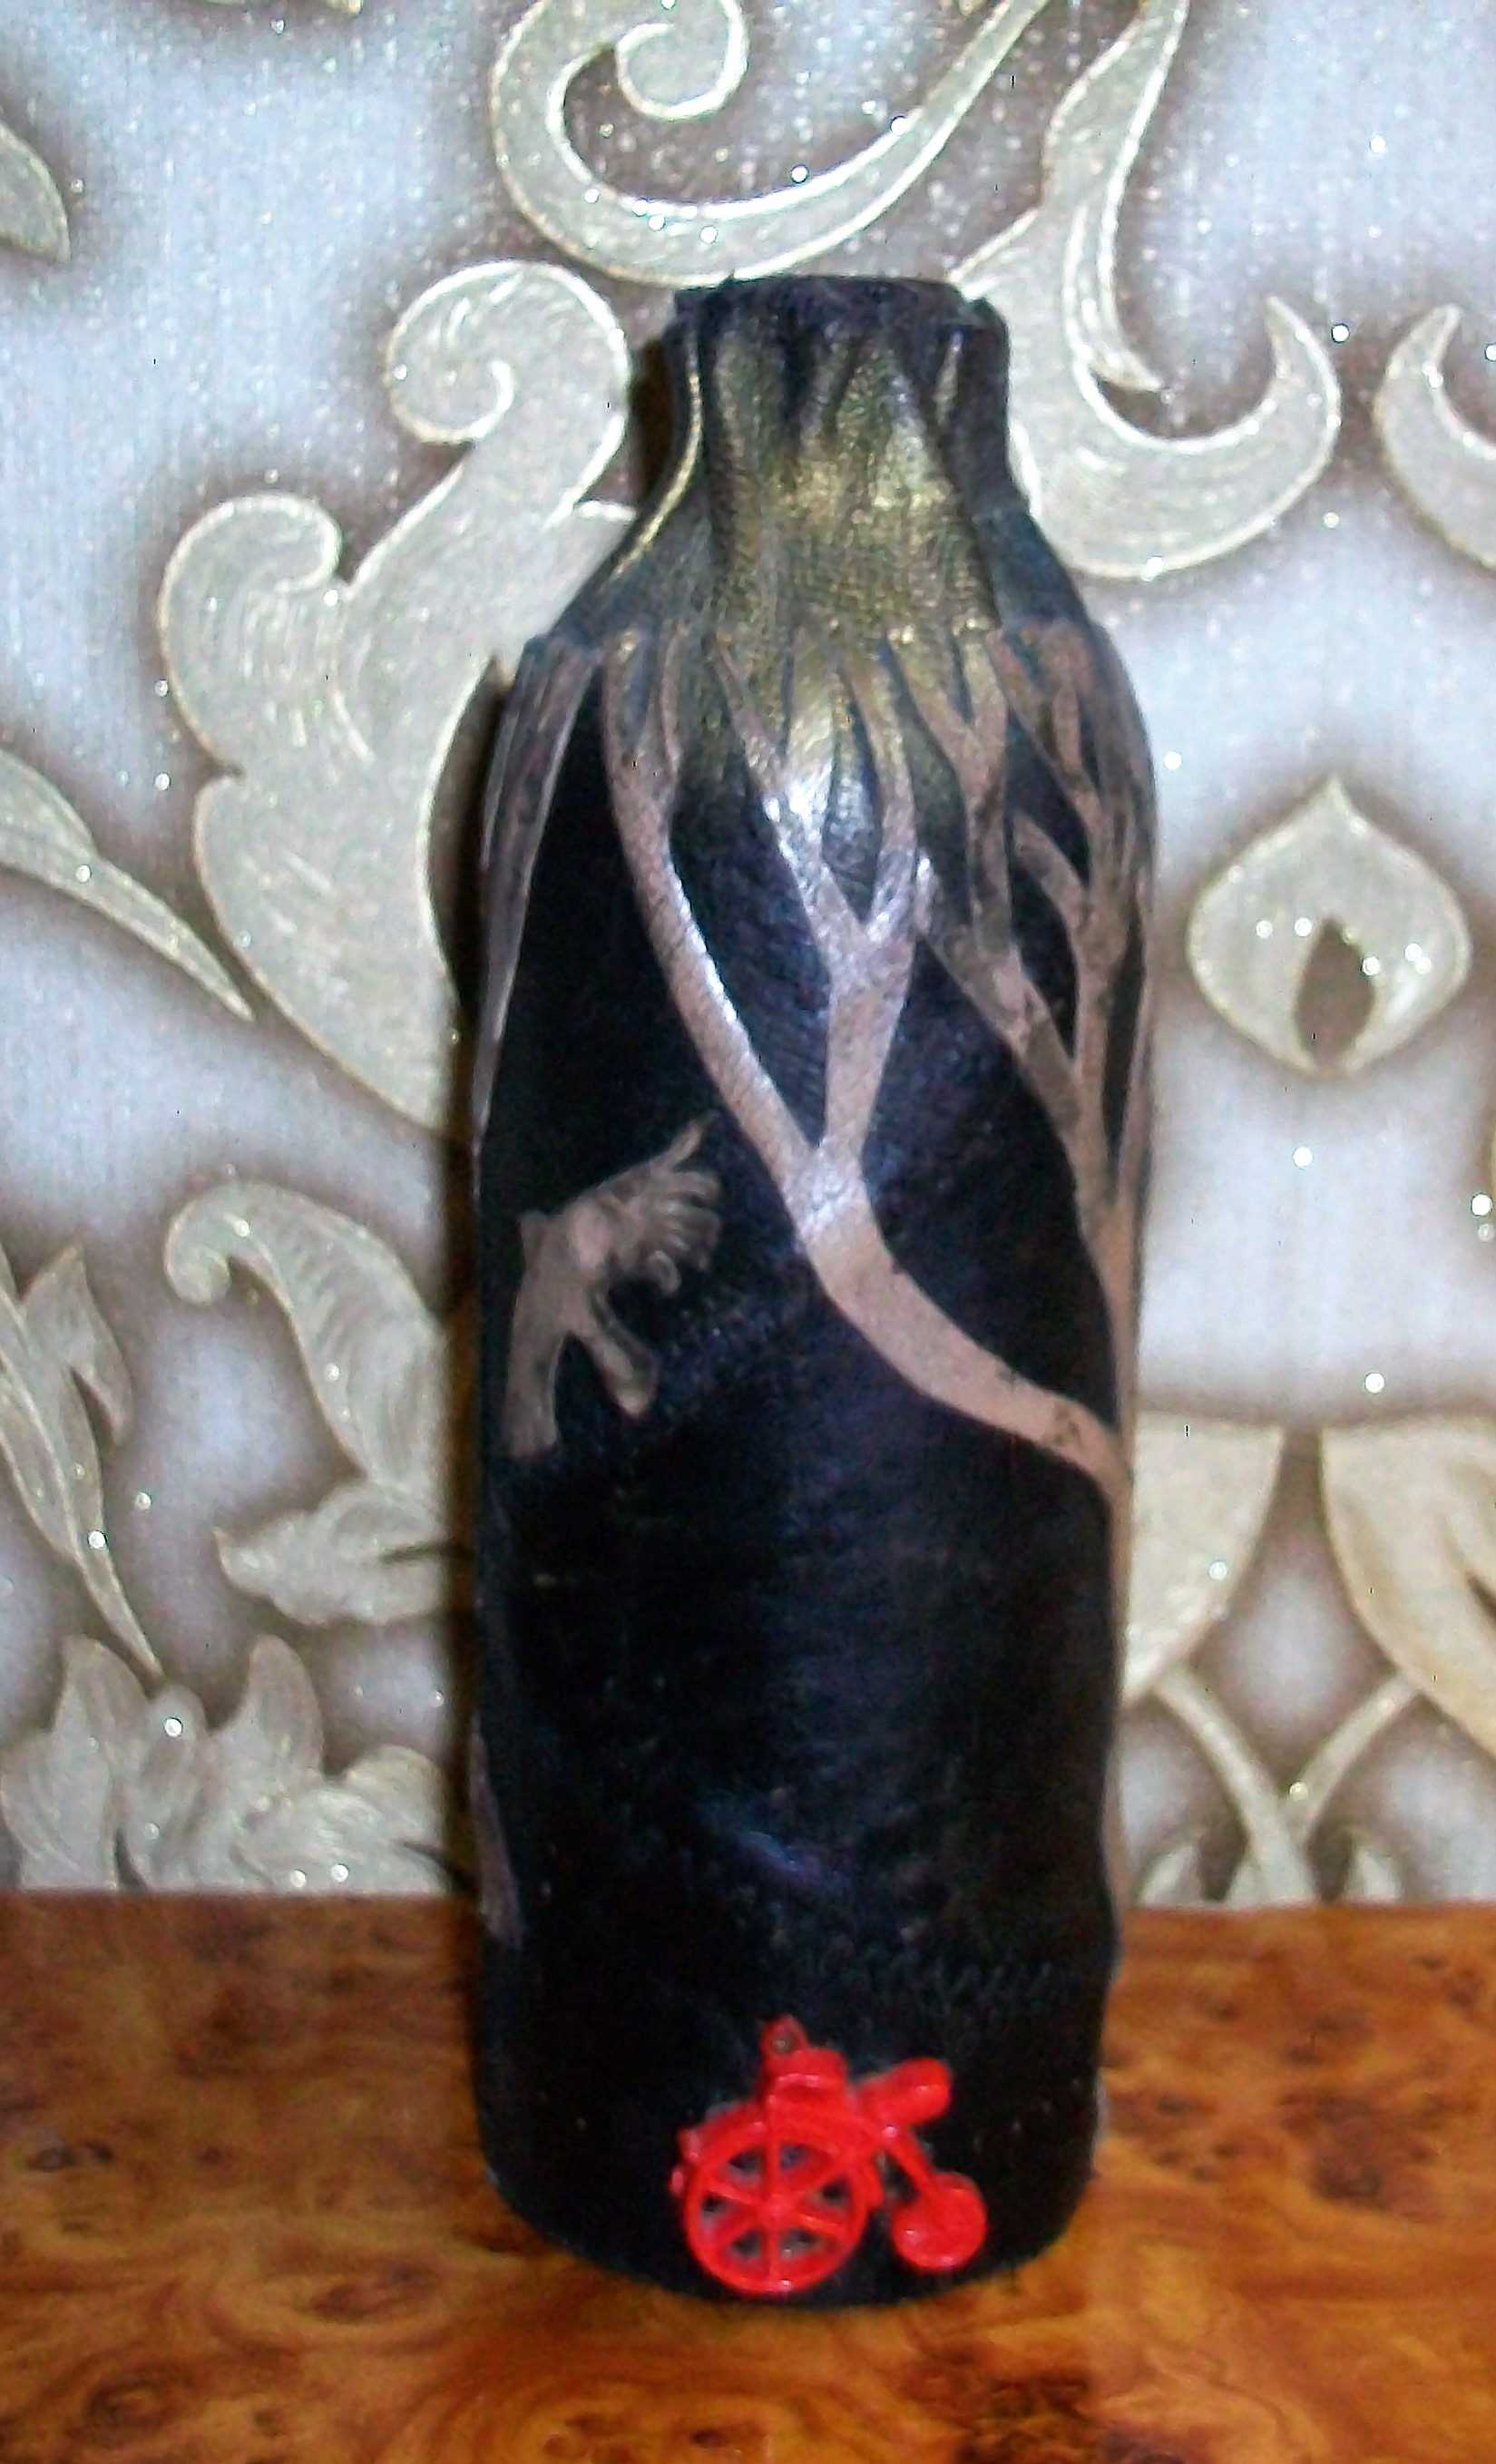 do-it-yourself version of the original decor of leather bottles